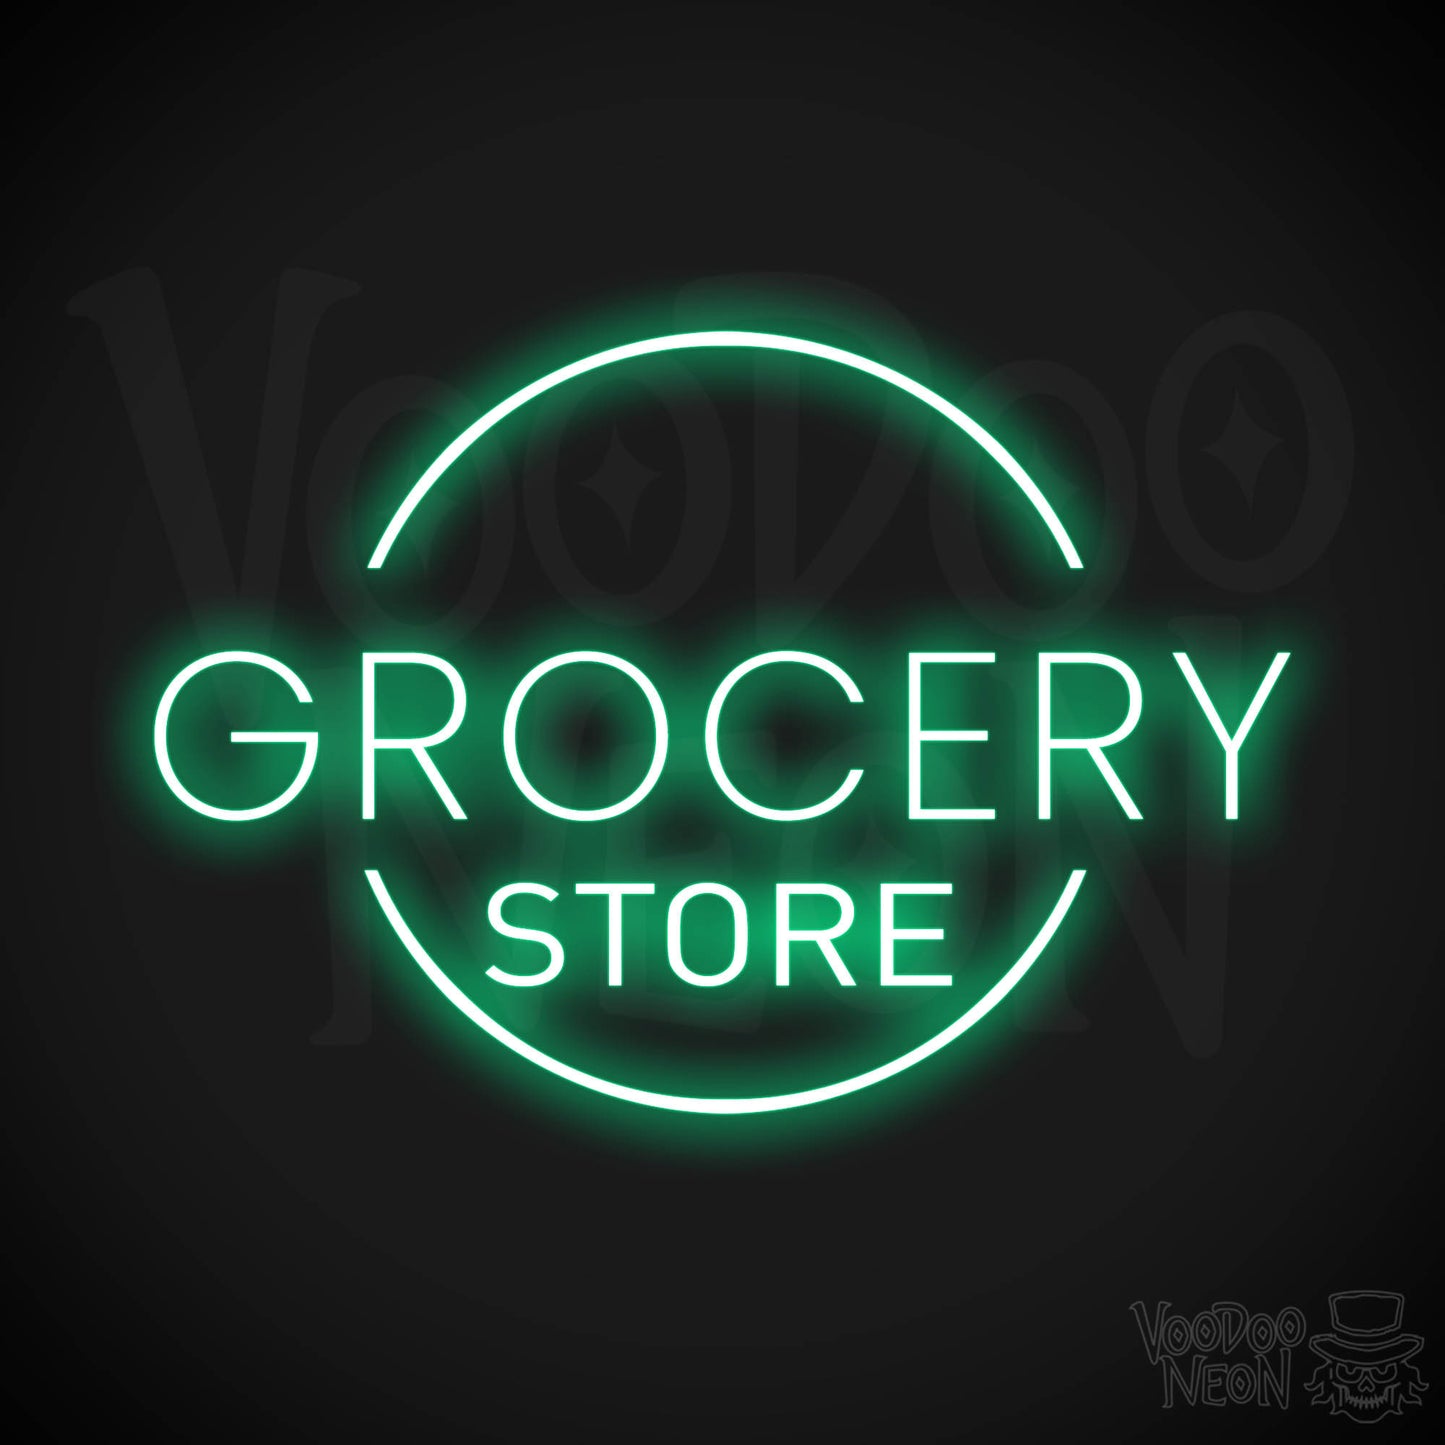 Grocery Store LED Neon - Green